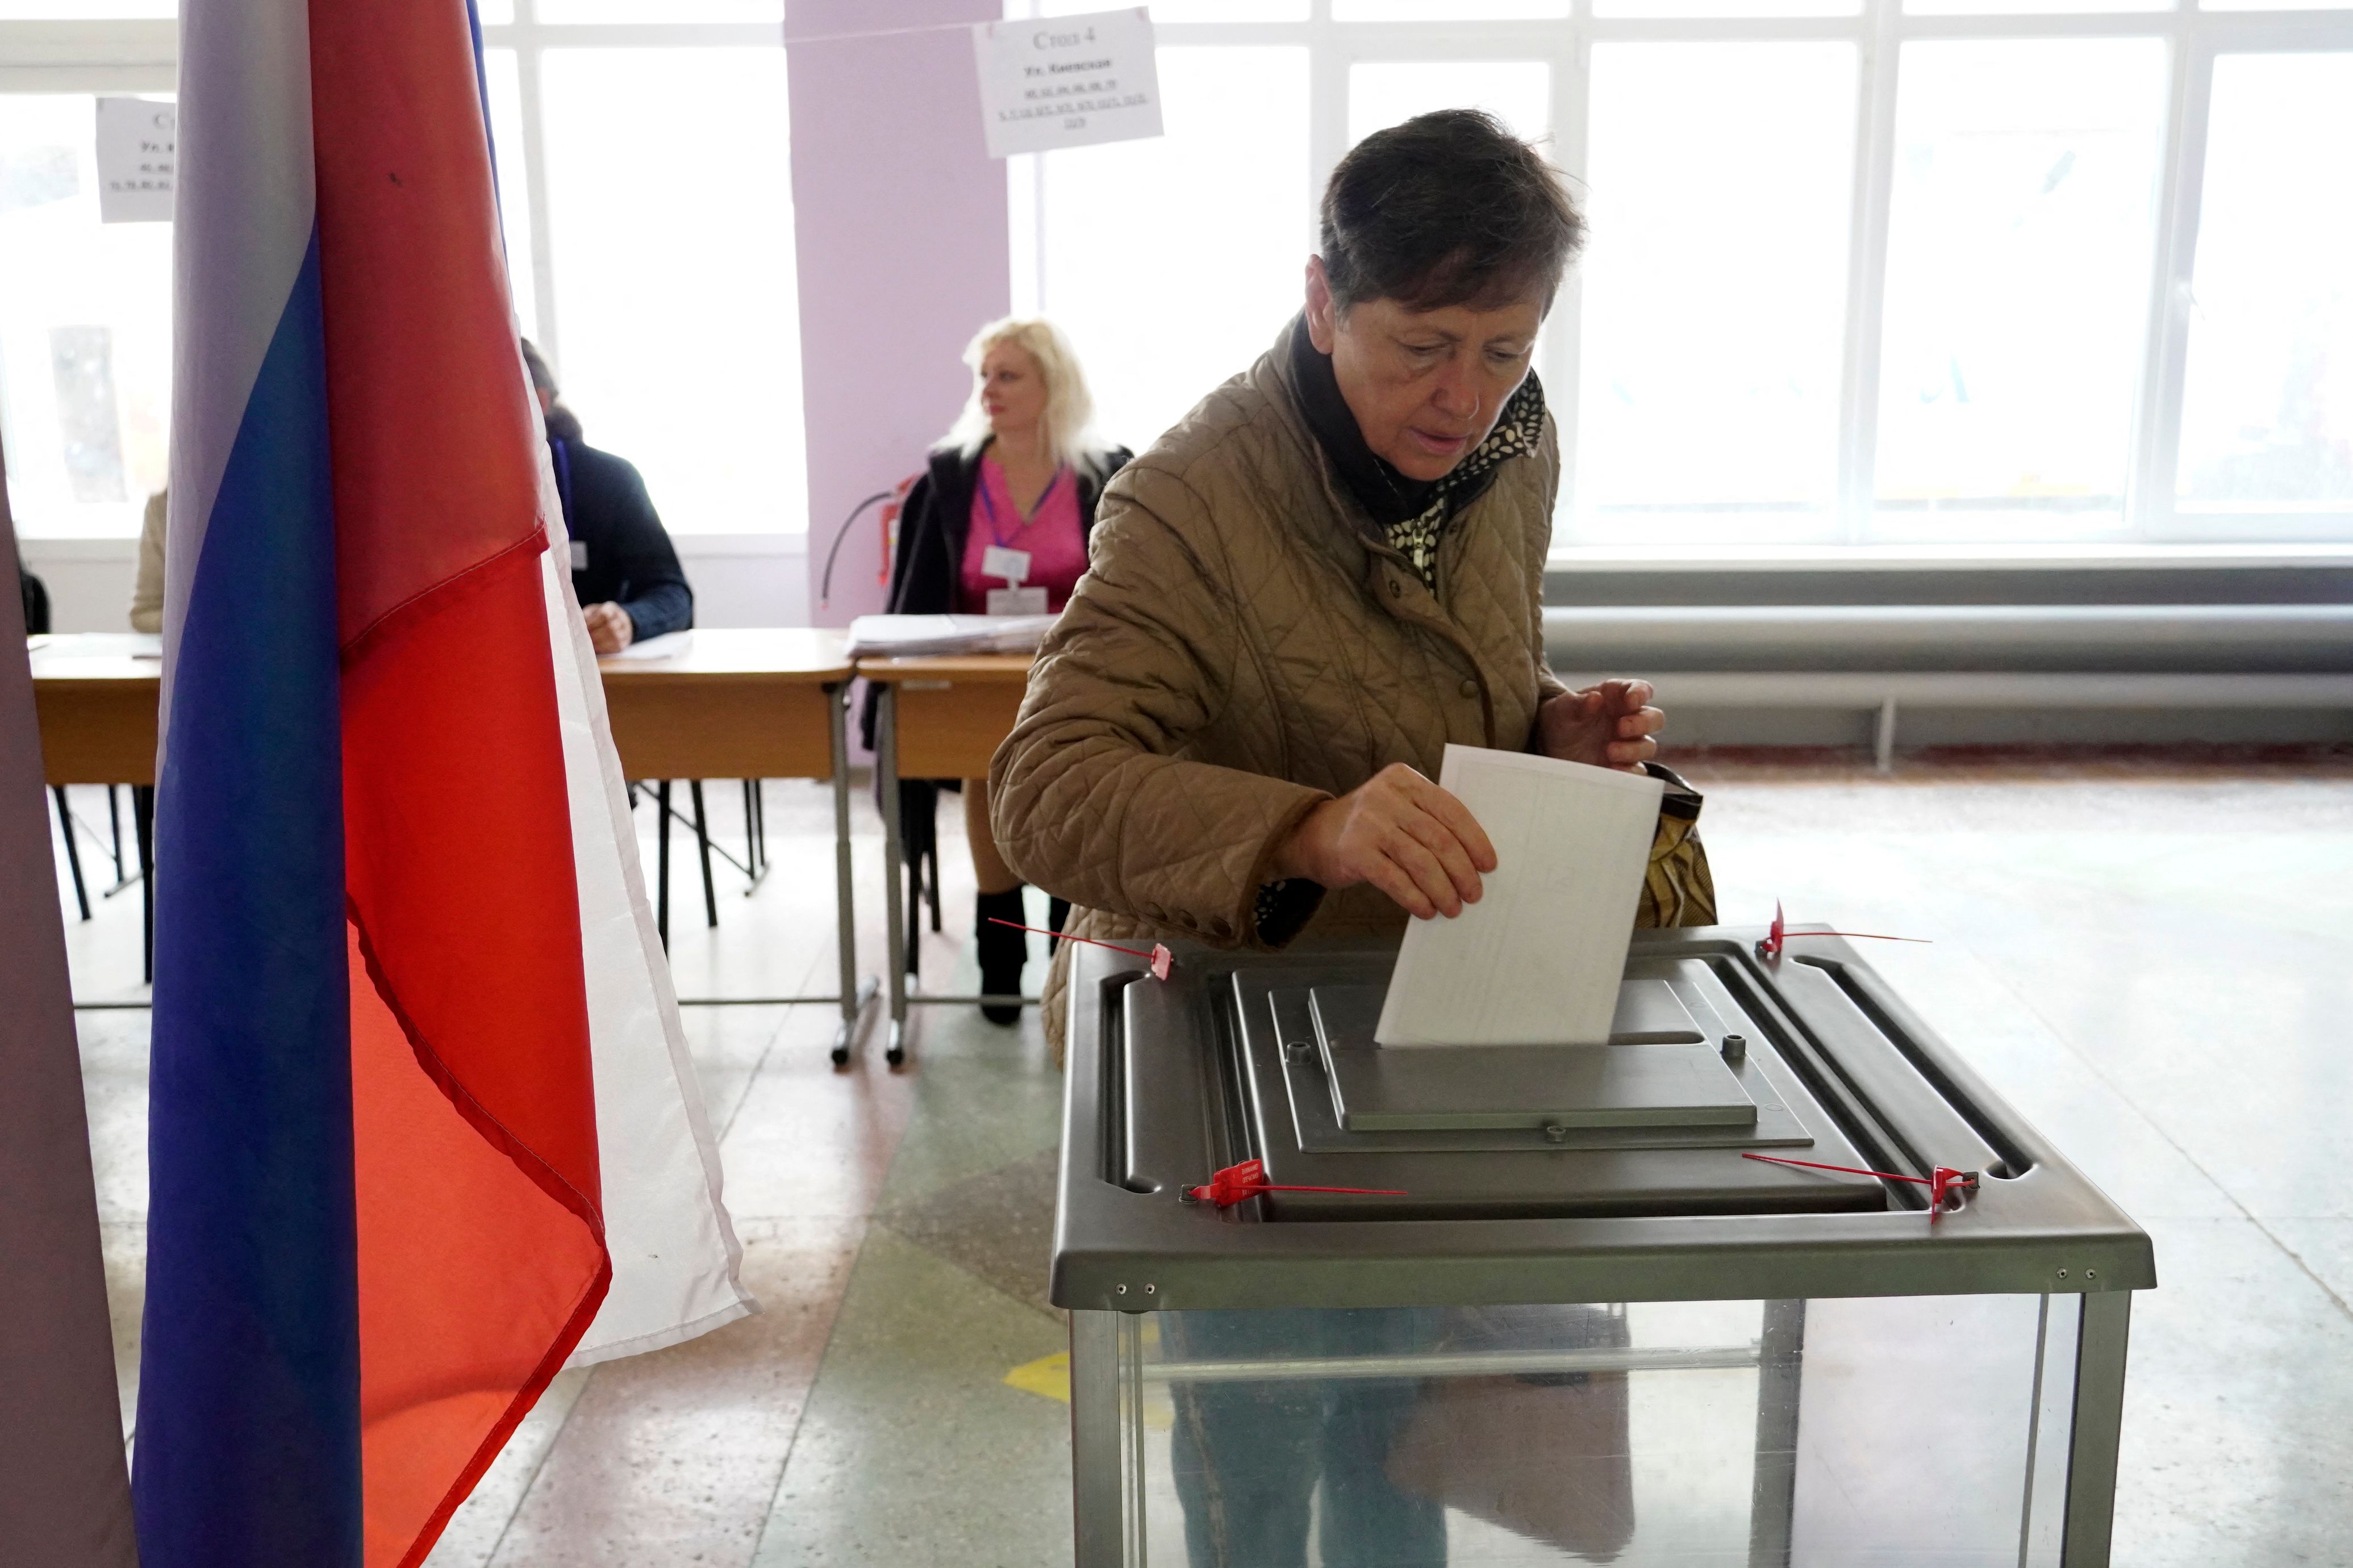 A woman casts her ballot in Mariupol